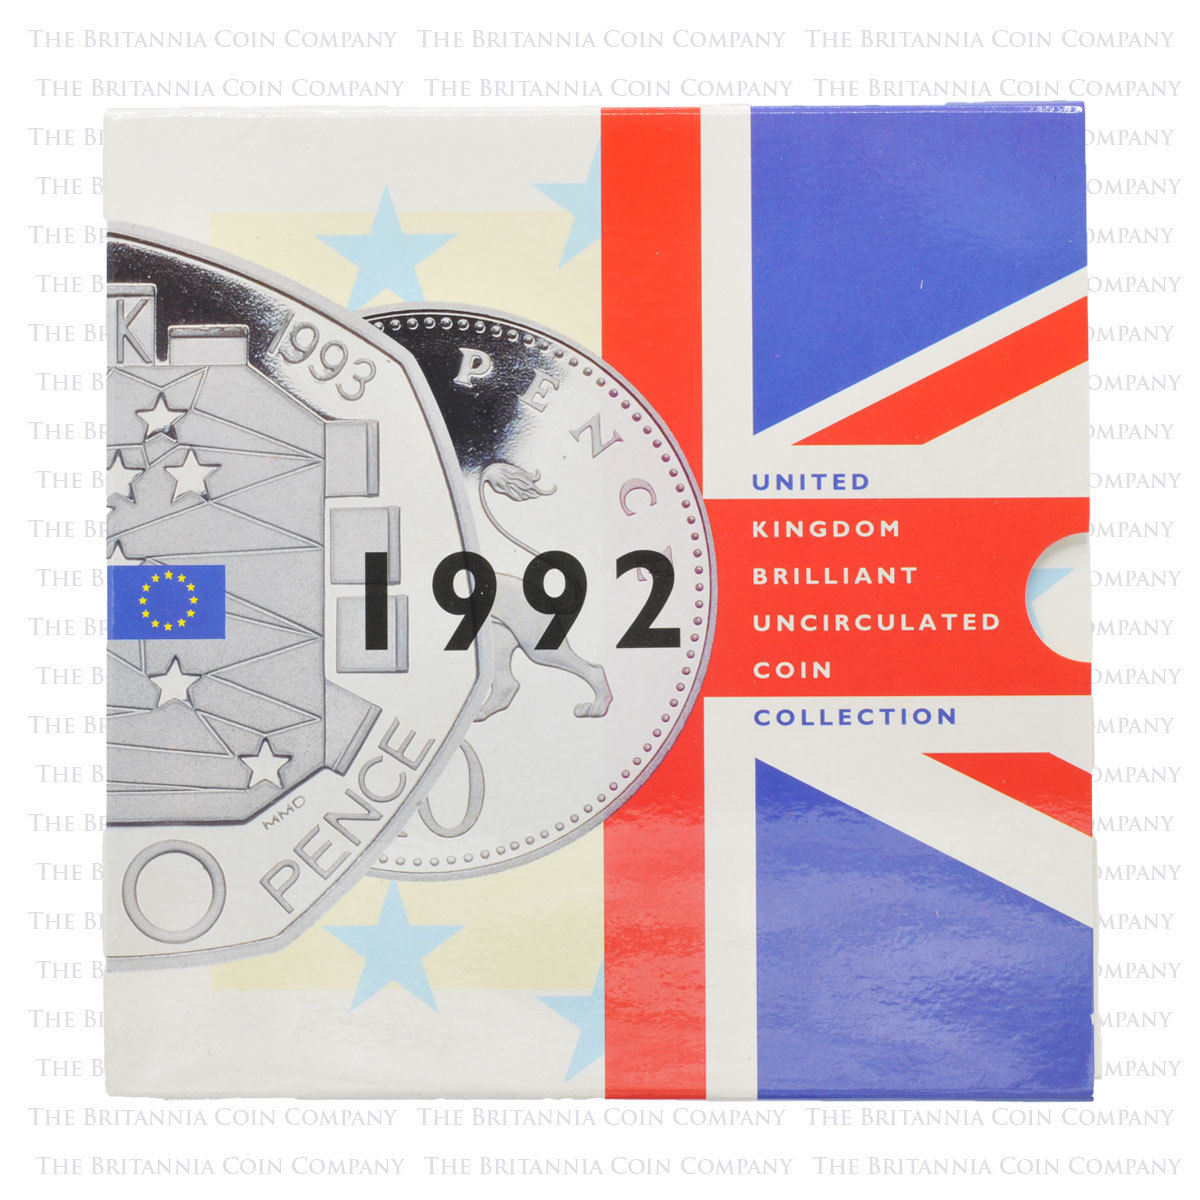 1992 UK Uncirculated Coin Collection